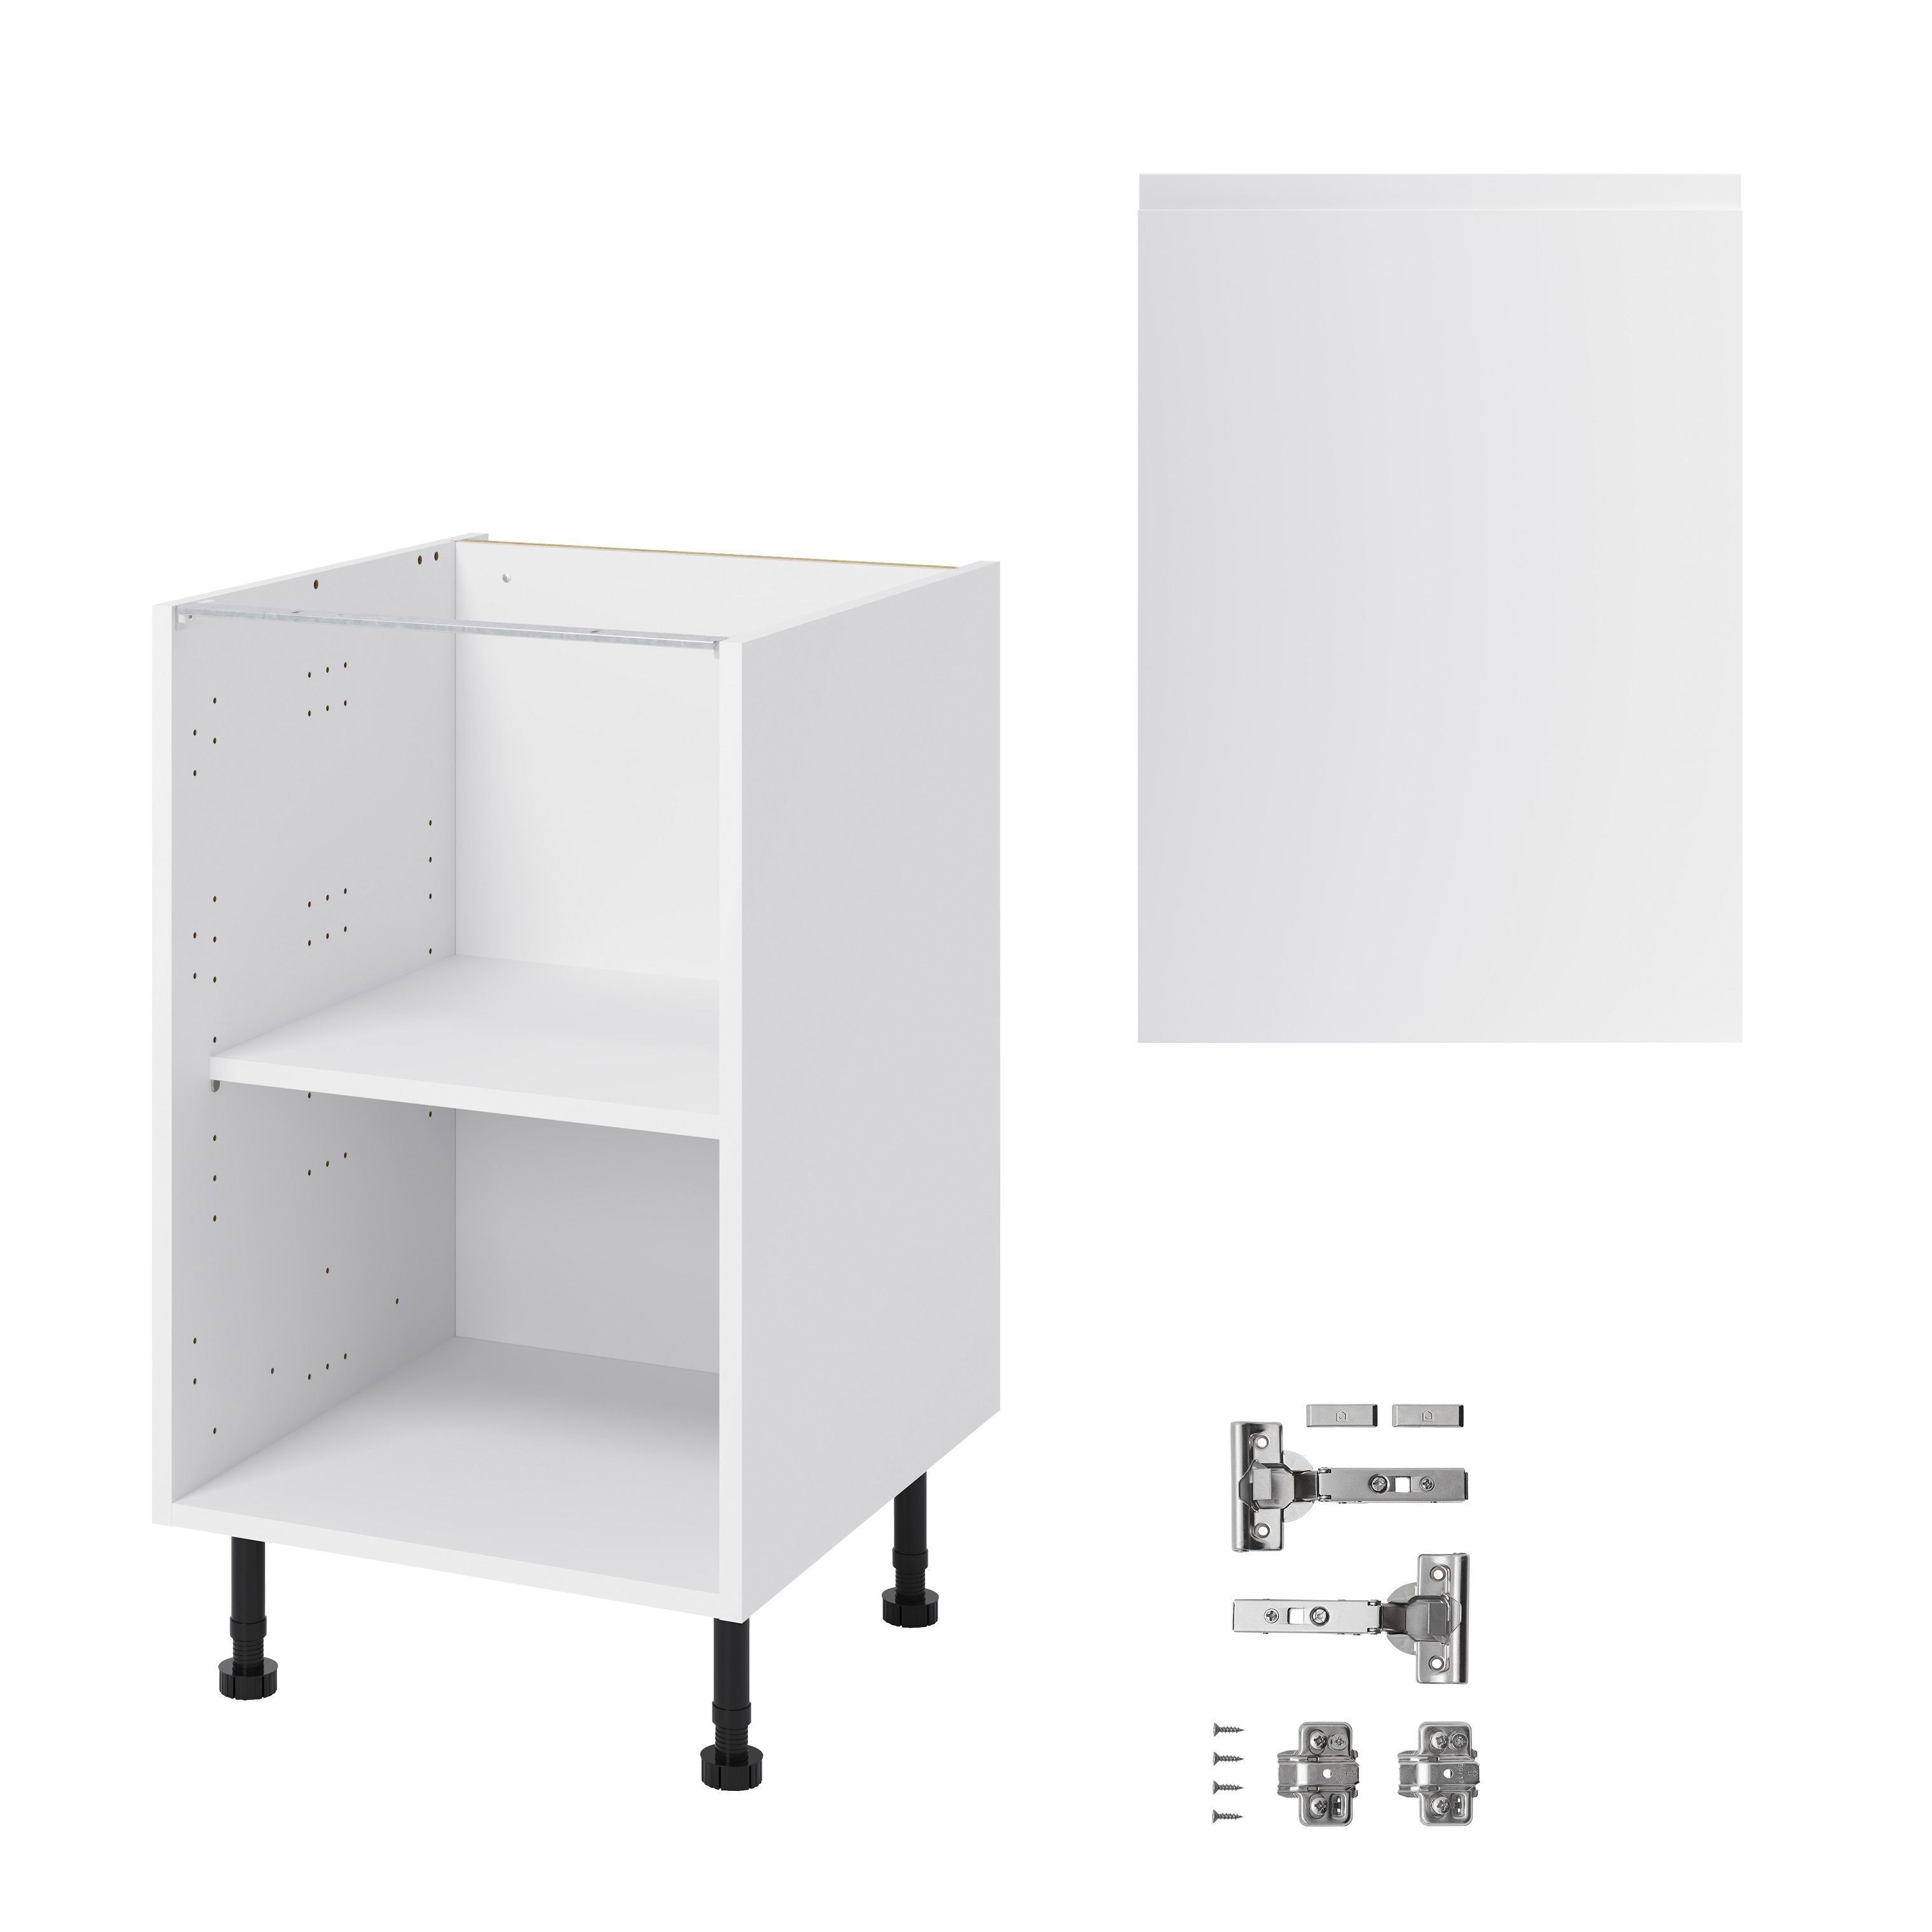 GoodHome Garcinia Gloss light grey integrated handle Base Kitchen cabinet (W)500mm (H)720mm